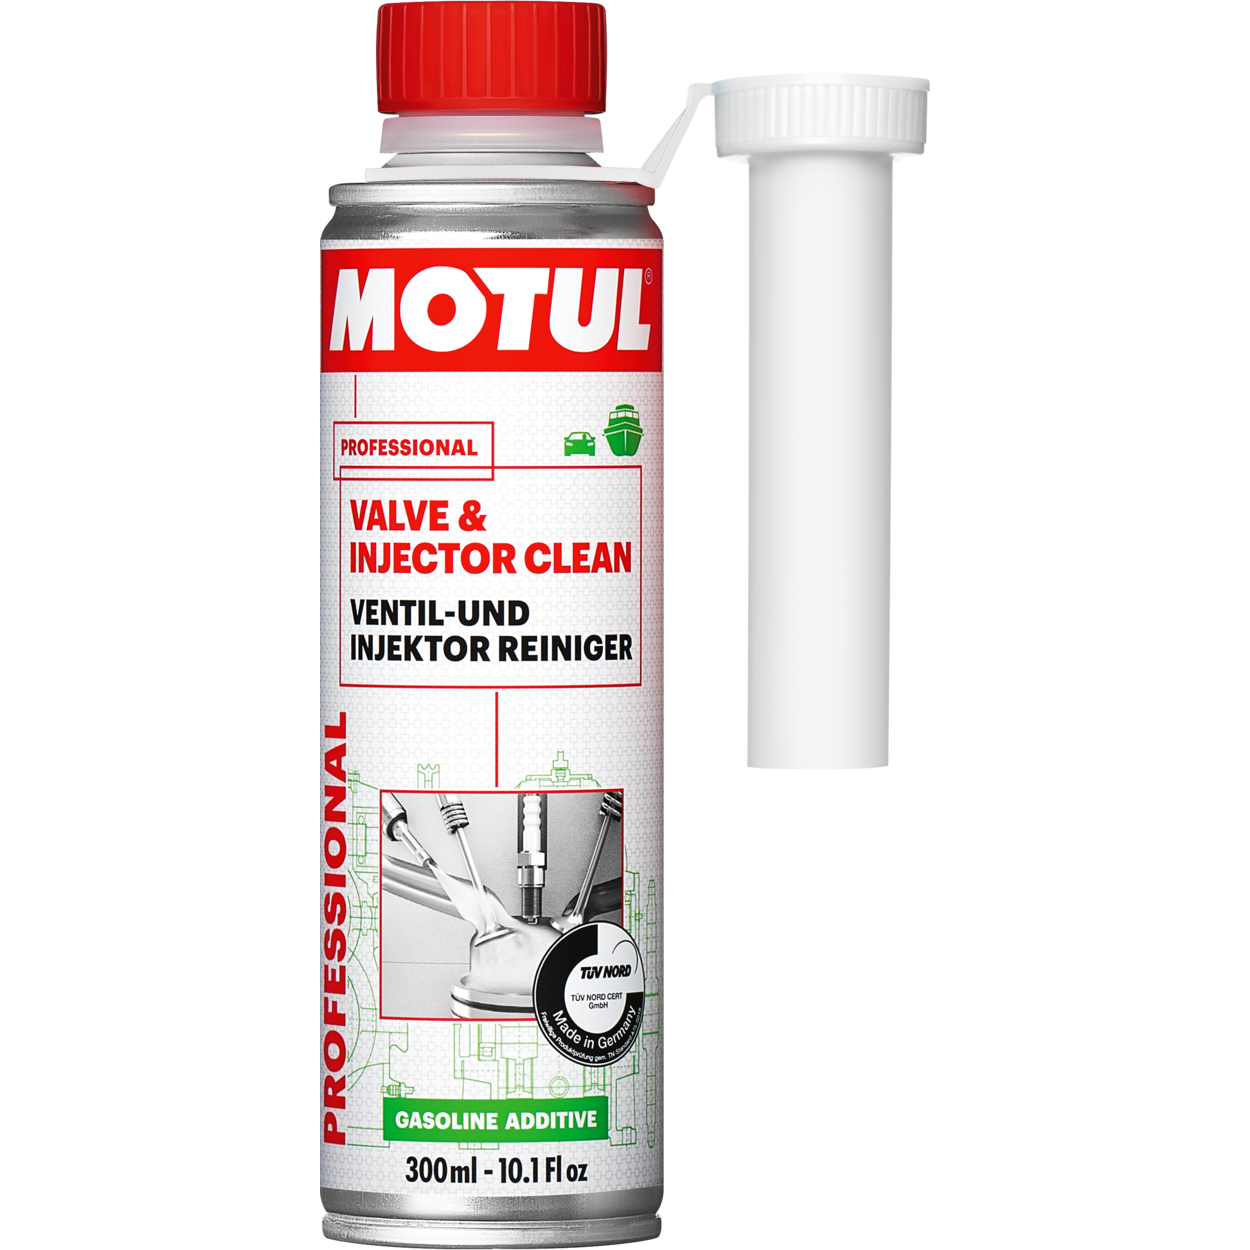 MOTUL VALVE AND INJECTOR CLEANER - 300ml